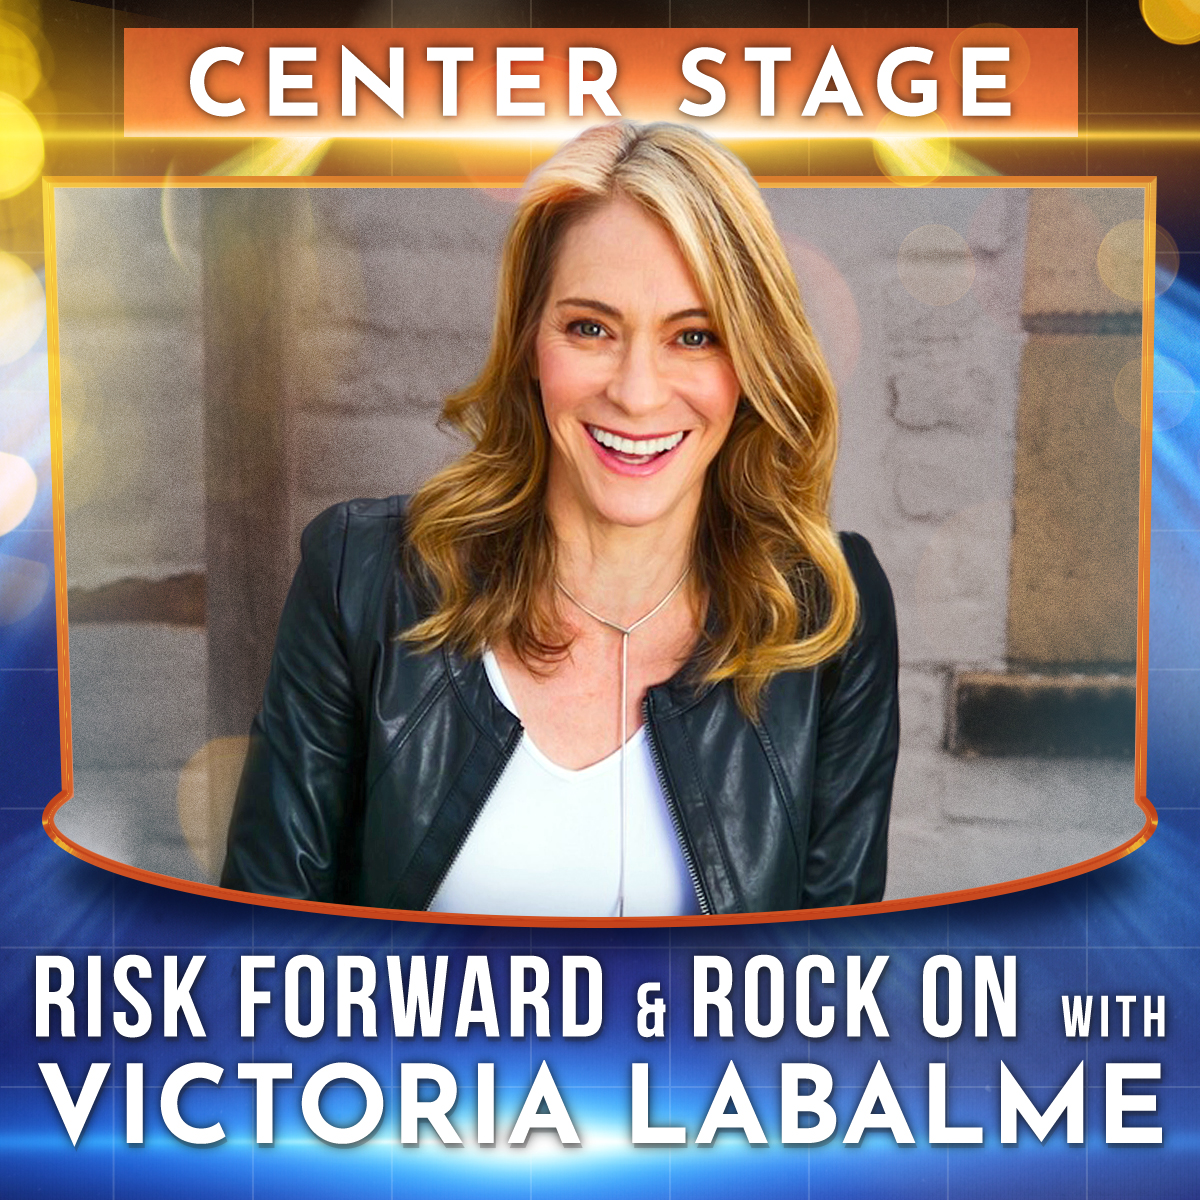 How to Risk Forward & Rock On 🤘 Center Stage With Victoria Labalme